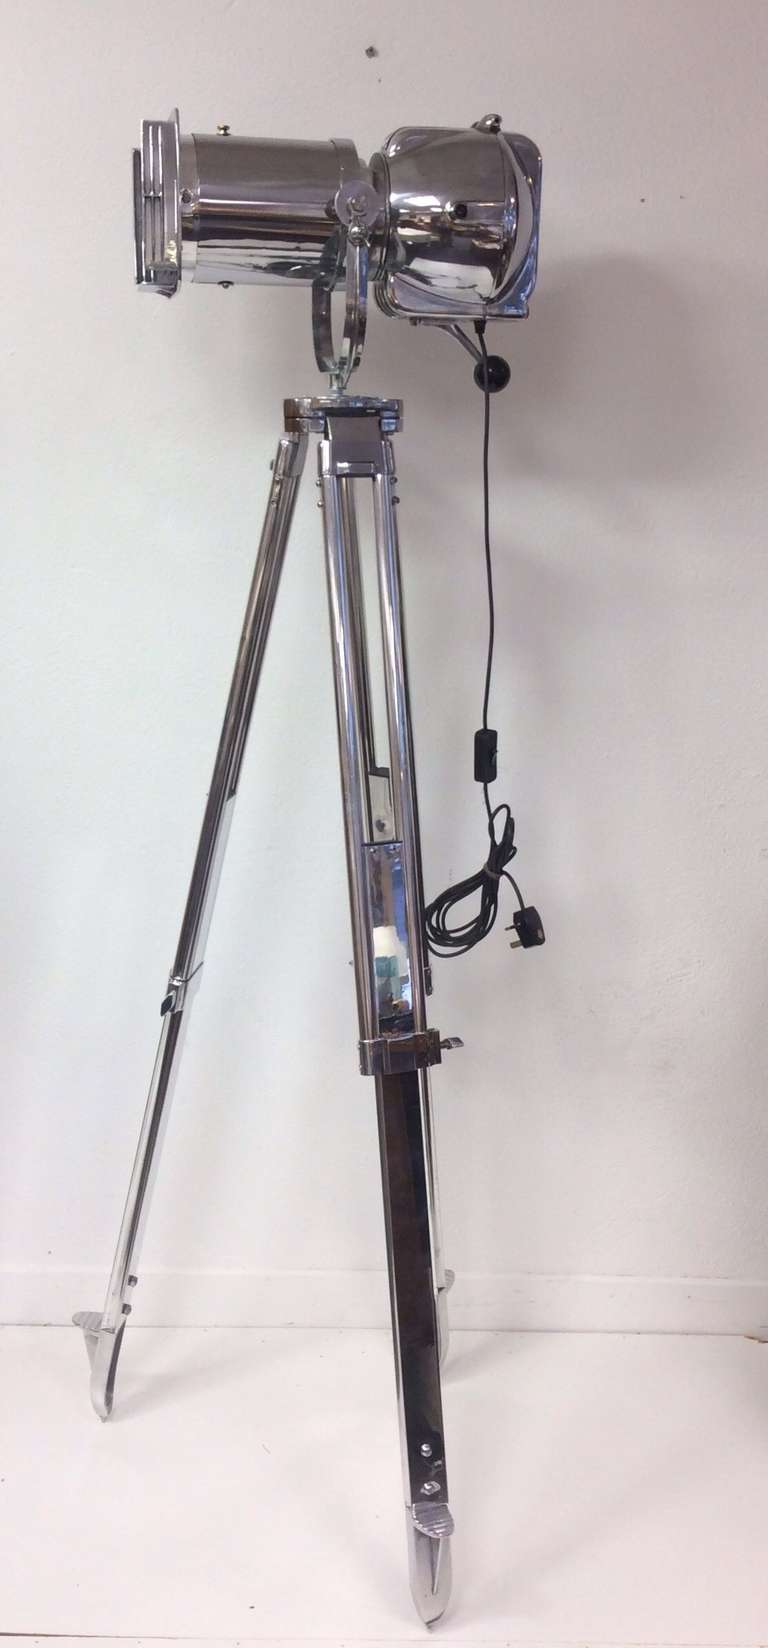 An impressive theater light by Strand Electrics, on a telescopic stand.
Measure: The light is 24 cm H, 46 cm W, 22 cm D.